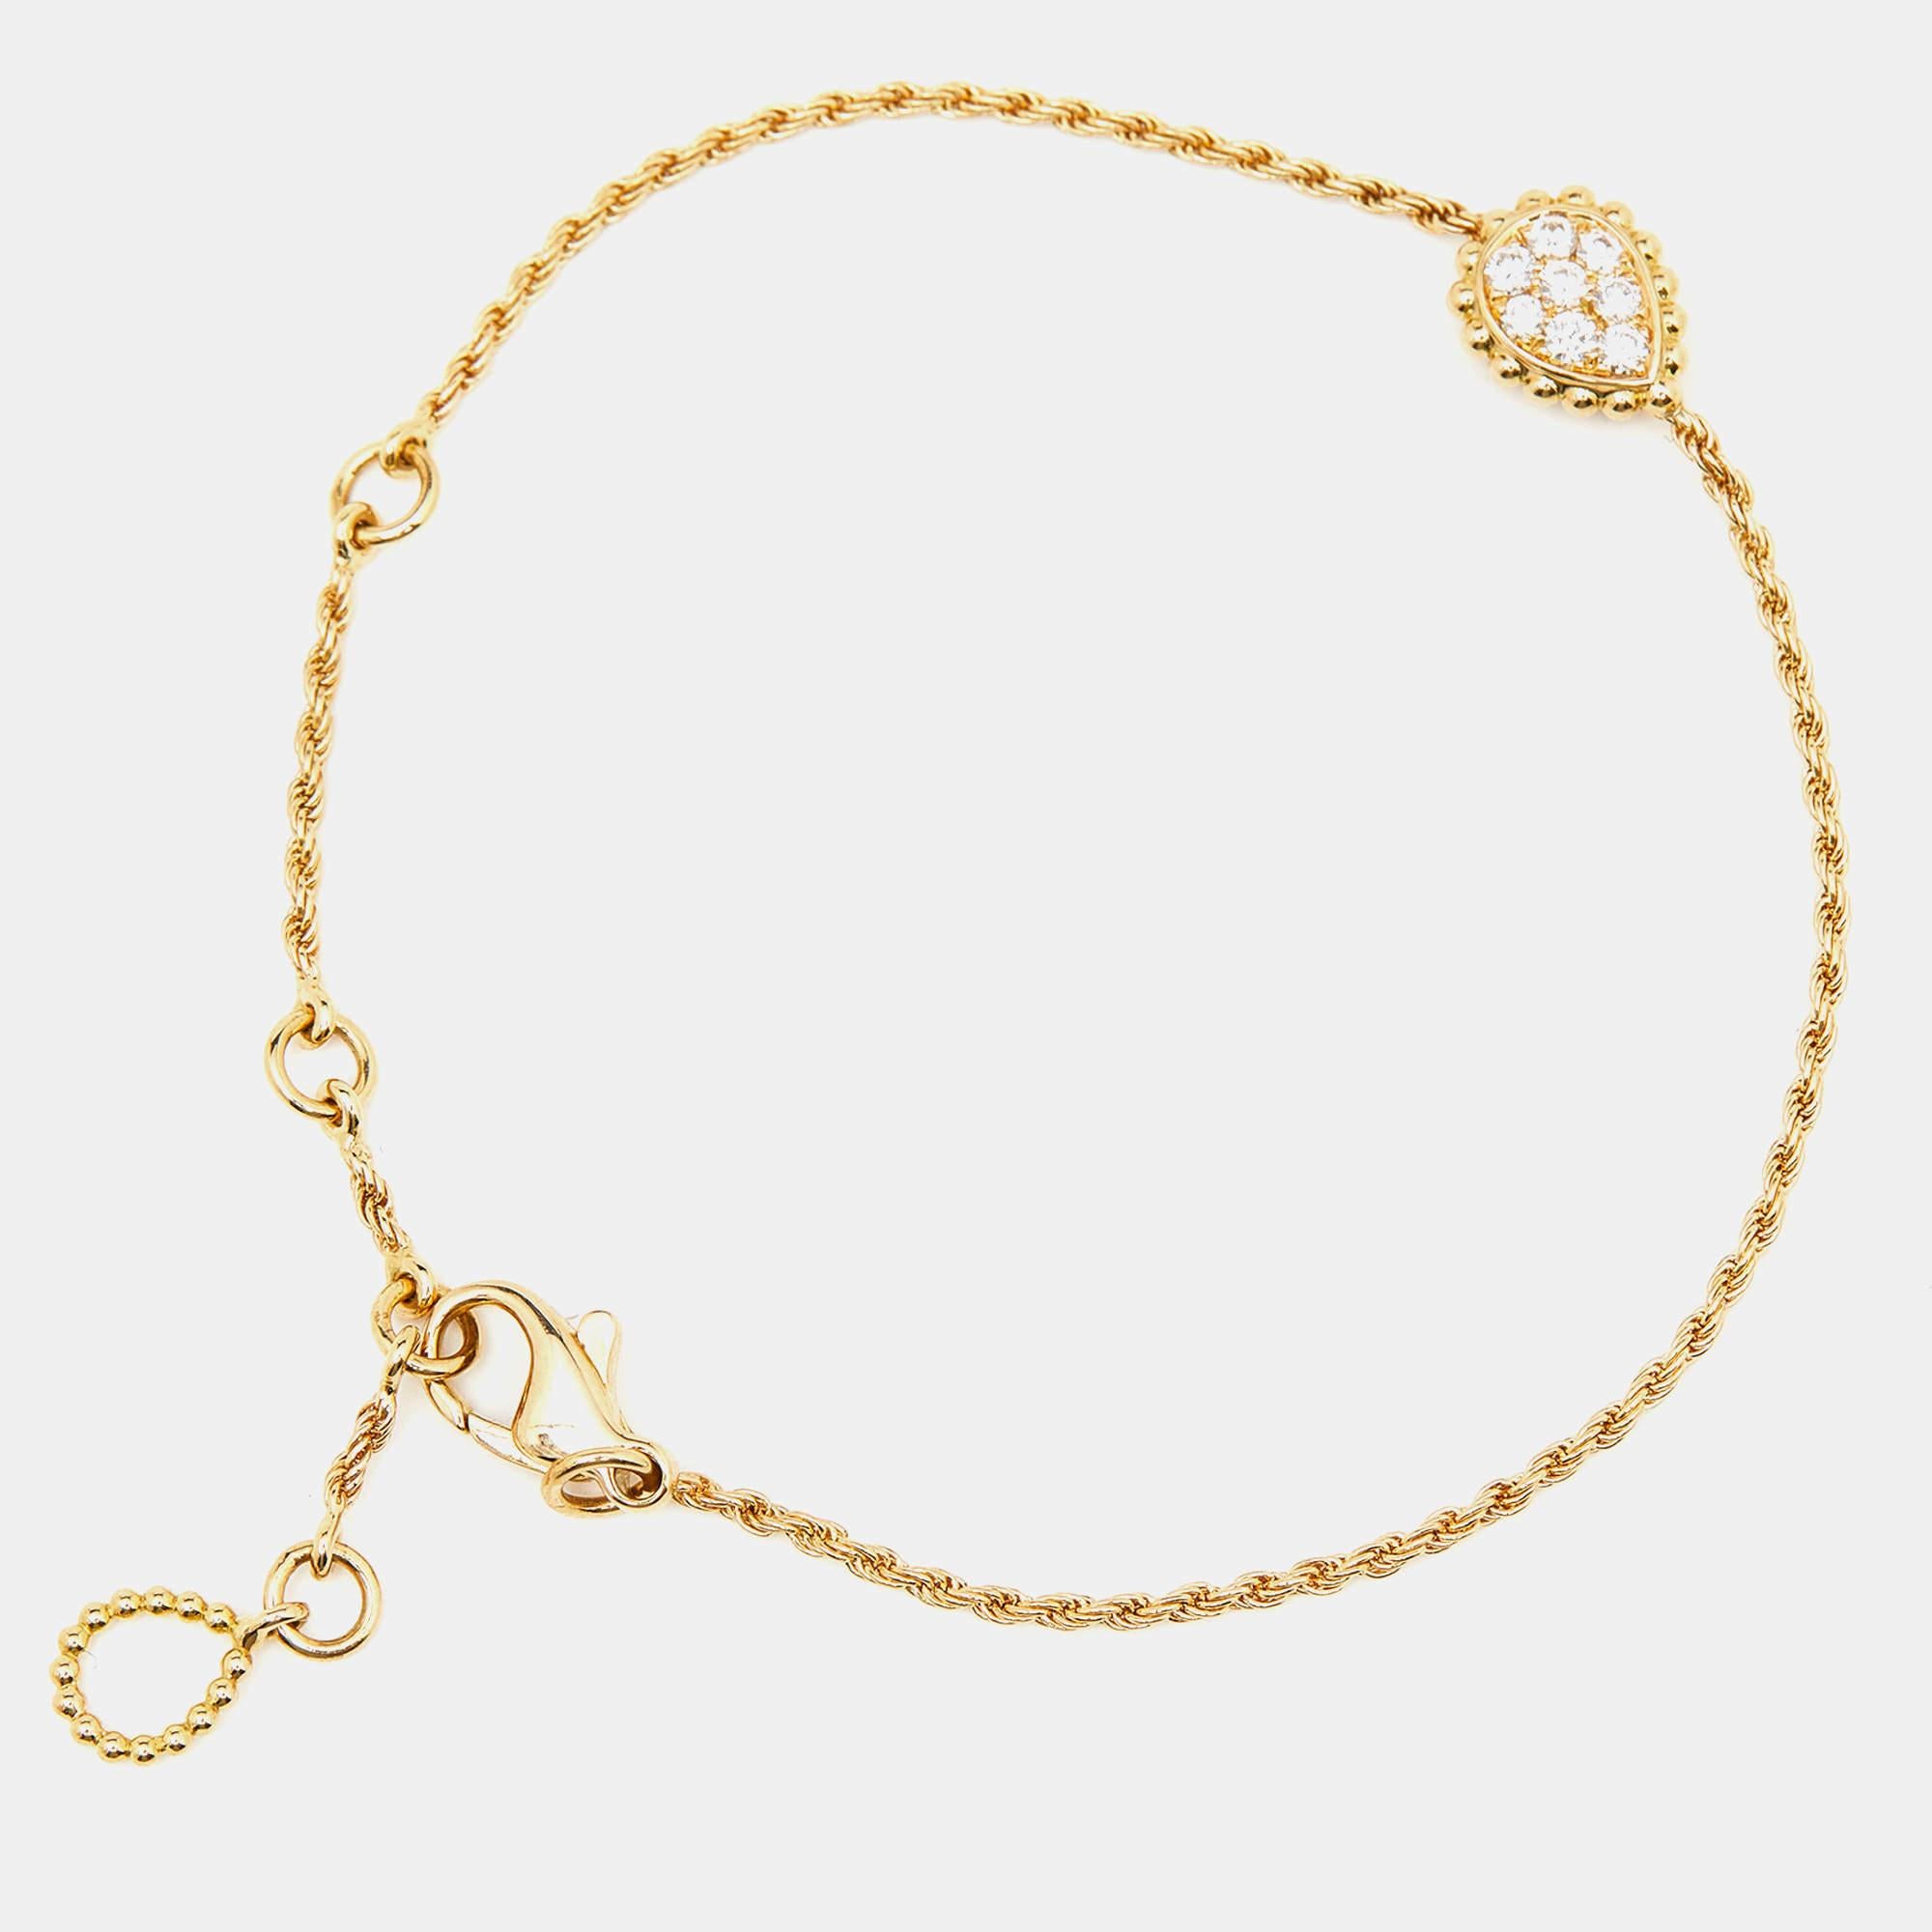 Boucheron's Serpent Boheme line from 1968 is a celebration of the house’s iconic serpent. The designs are defined by beaded borders, pear-shaped motifs, and coiled accents to represent the serpent’s textured skin. This bracelet carries the signature